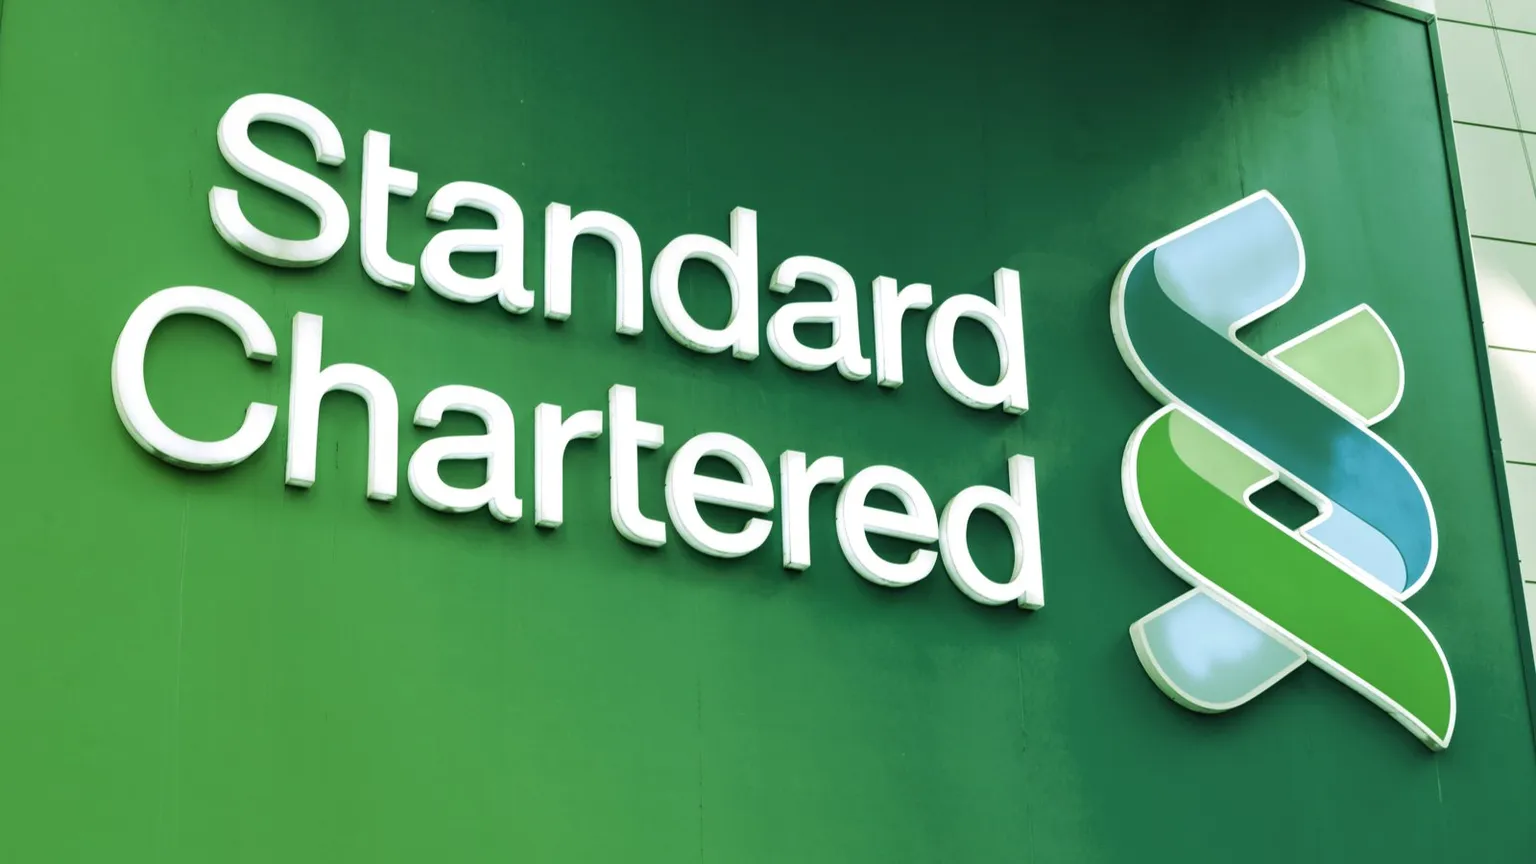 Despite having a base in the UK, the Standard Chartered does not offer retail banking services in Britain. Image: Shutterstock.